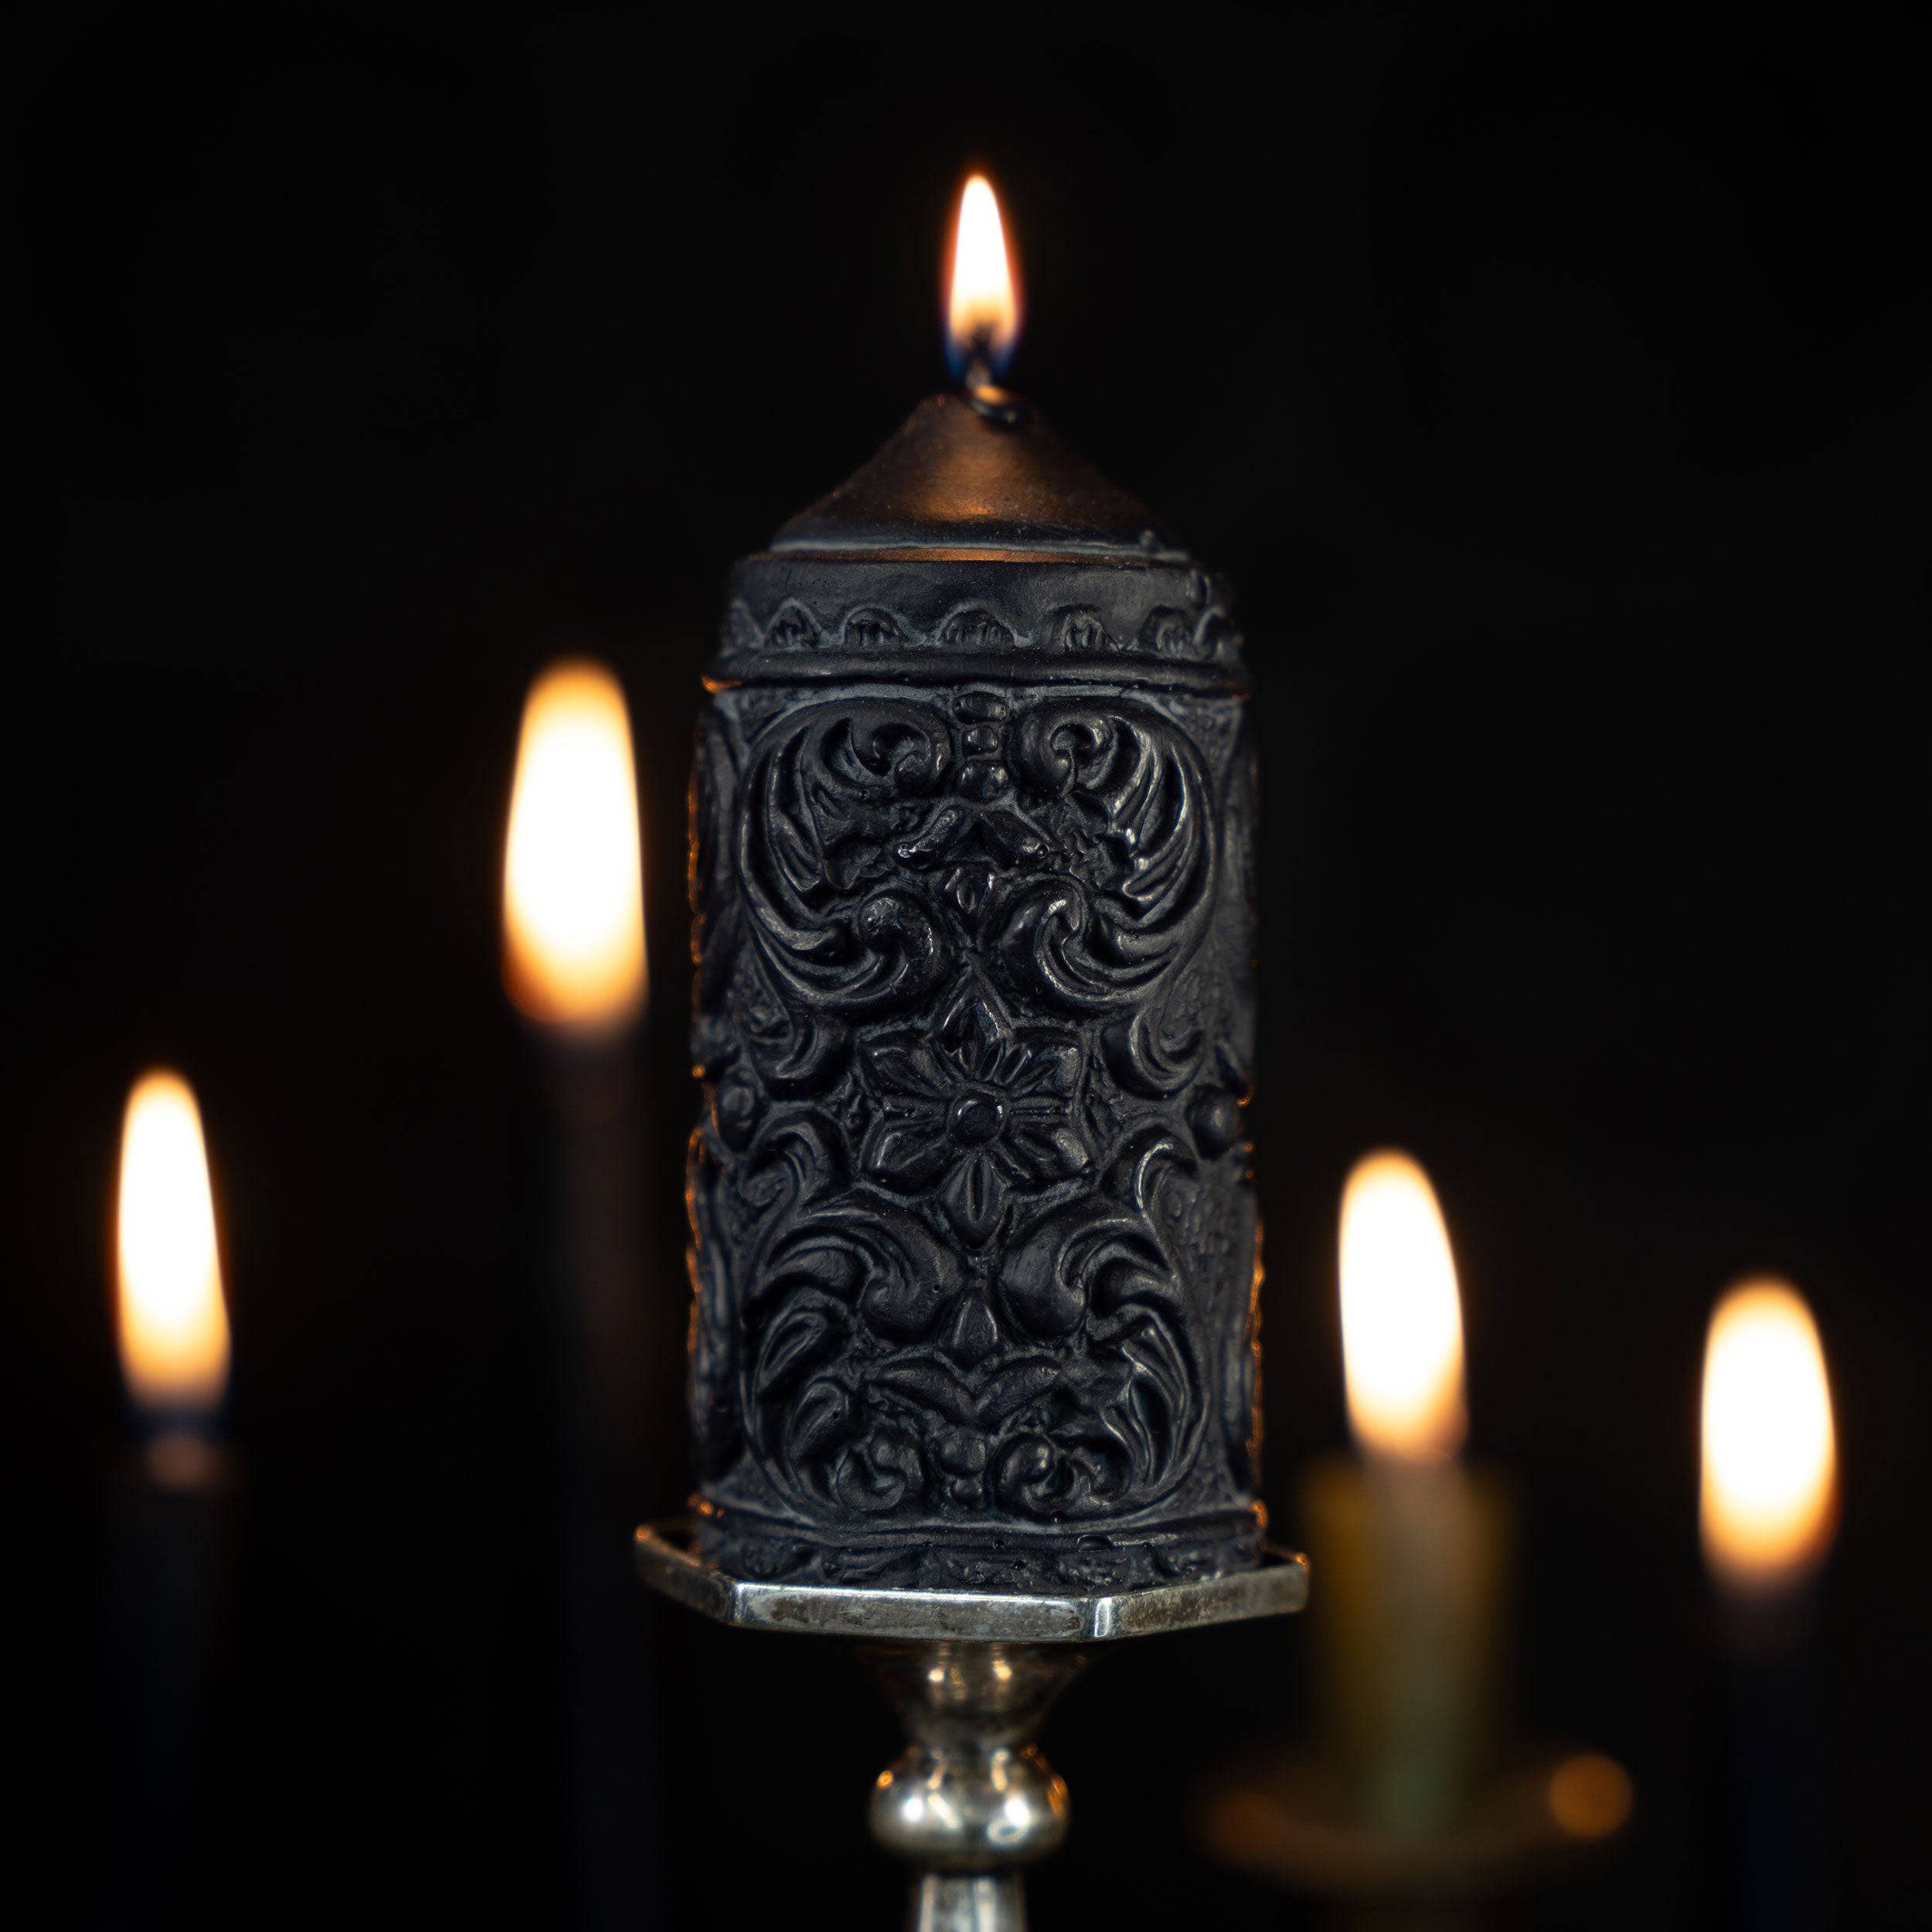 mildred gothic candle - the blackened teeth - gothic decor